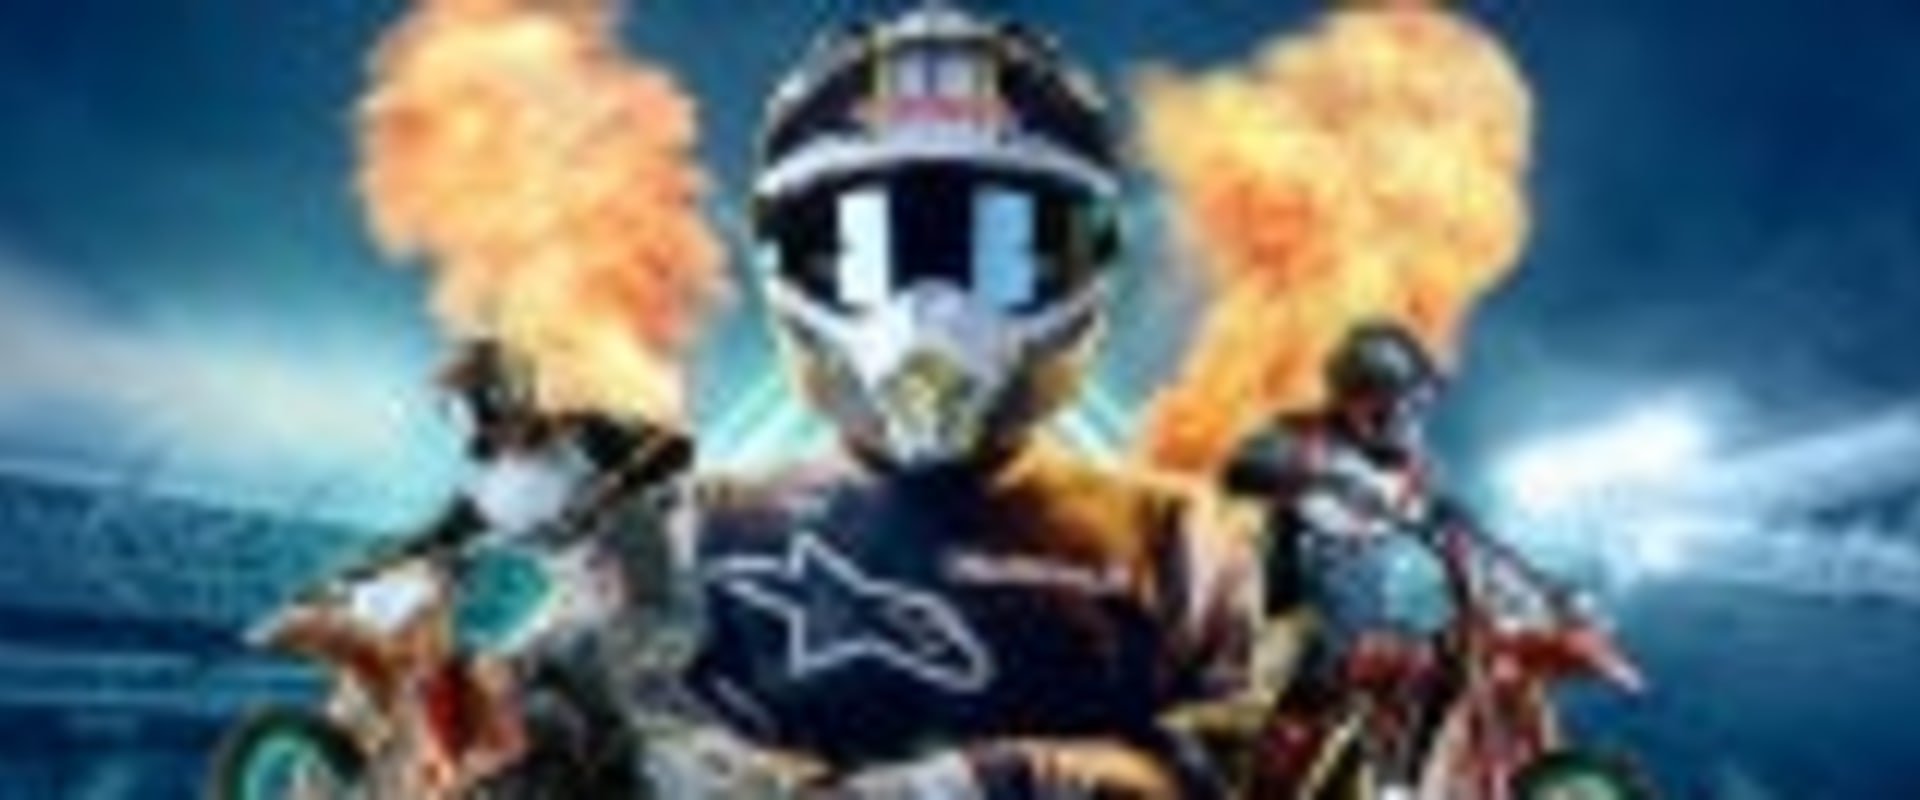 Ranking of the Top Rated PS4 Motocross Games